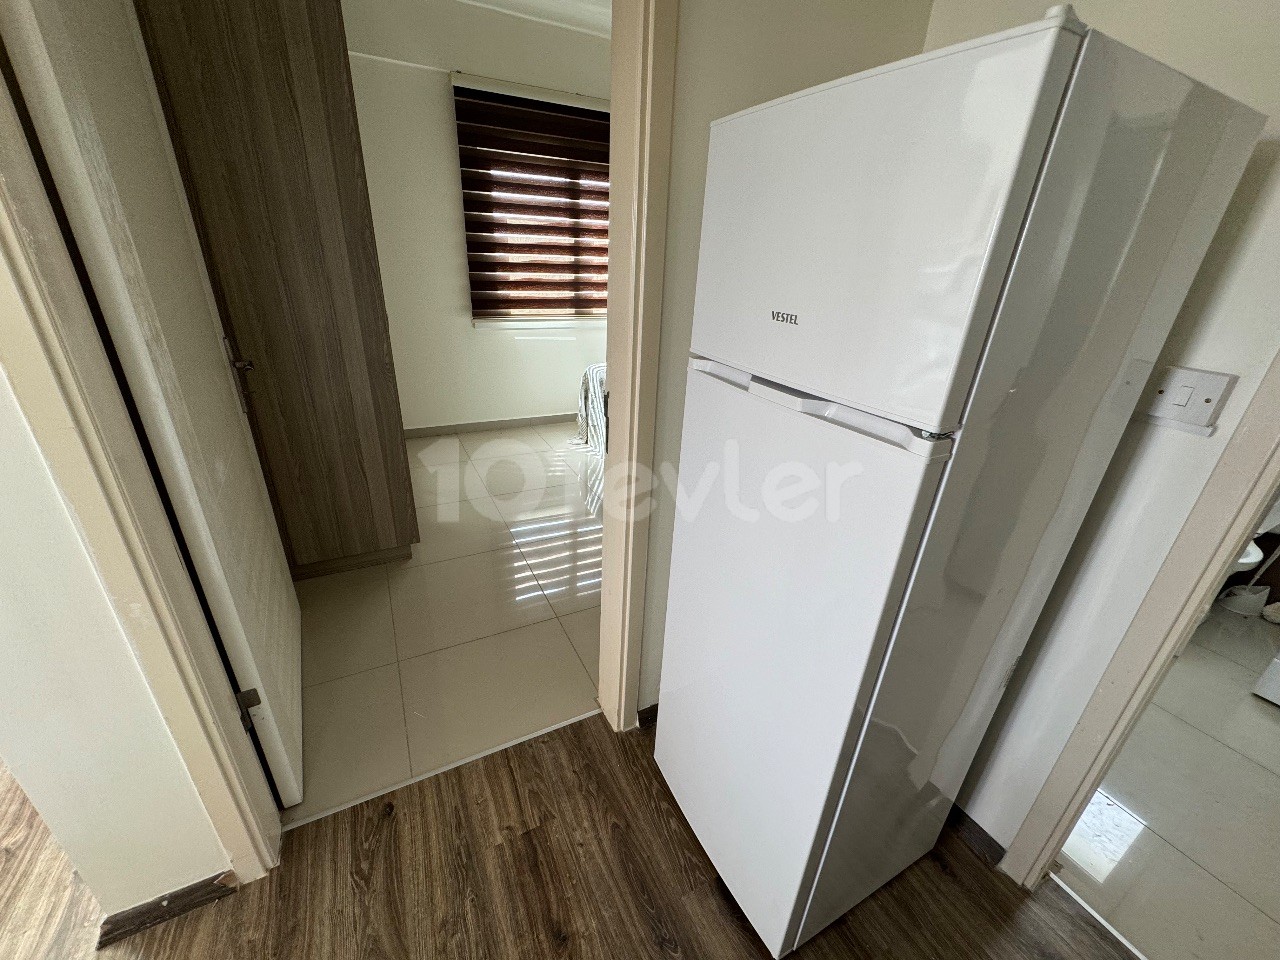 Fully Furnished 2 Bedroom Penthouse Flat FOR RENT in Yenikent, Nicosia!